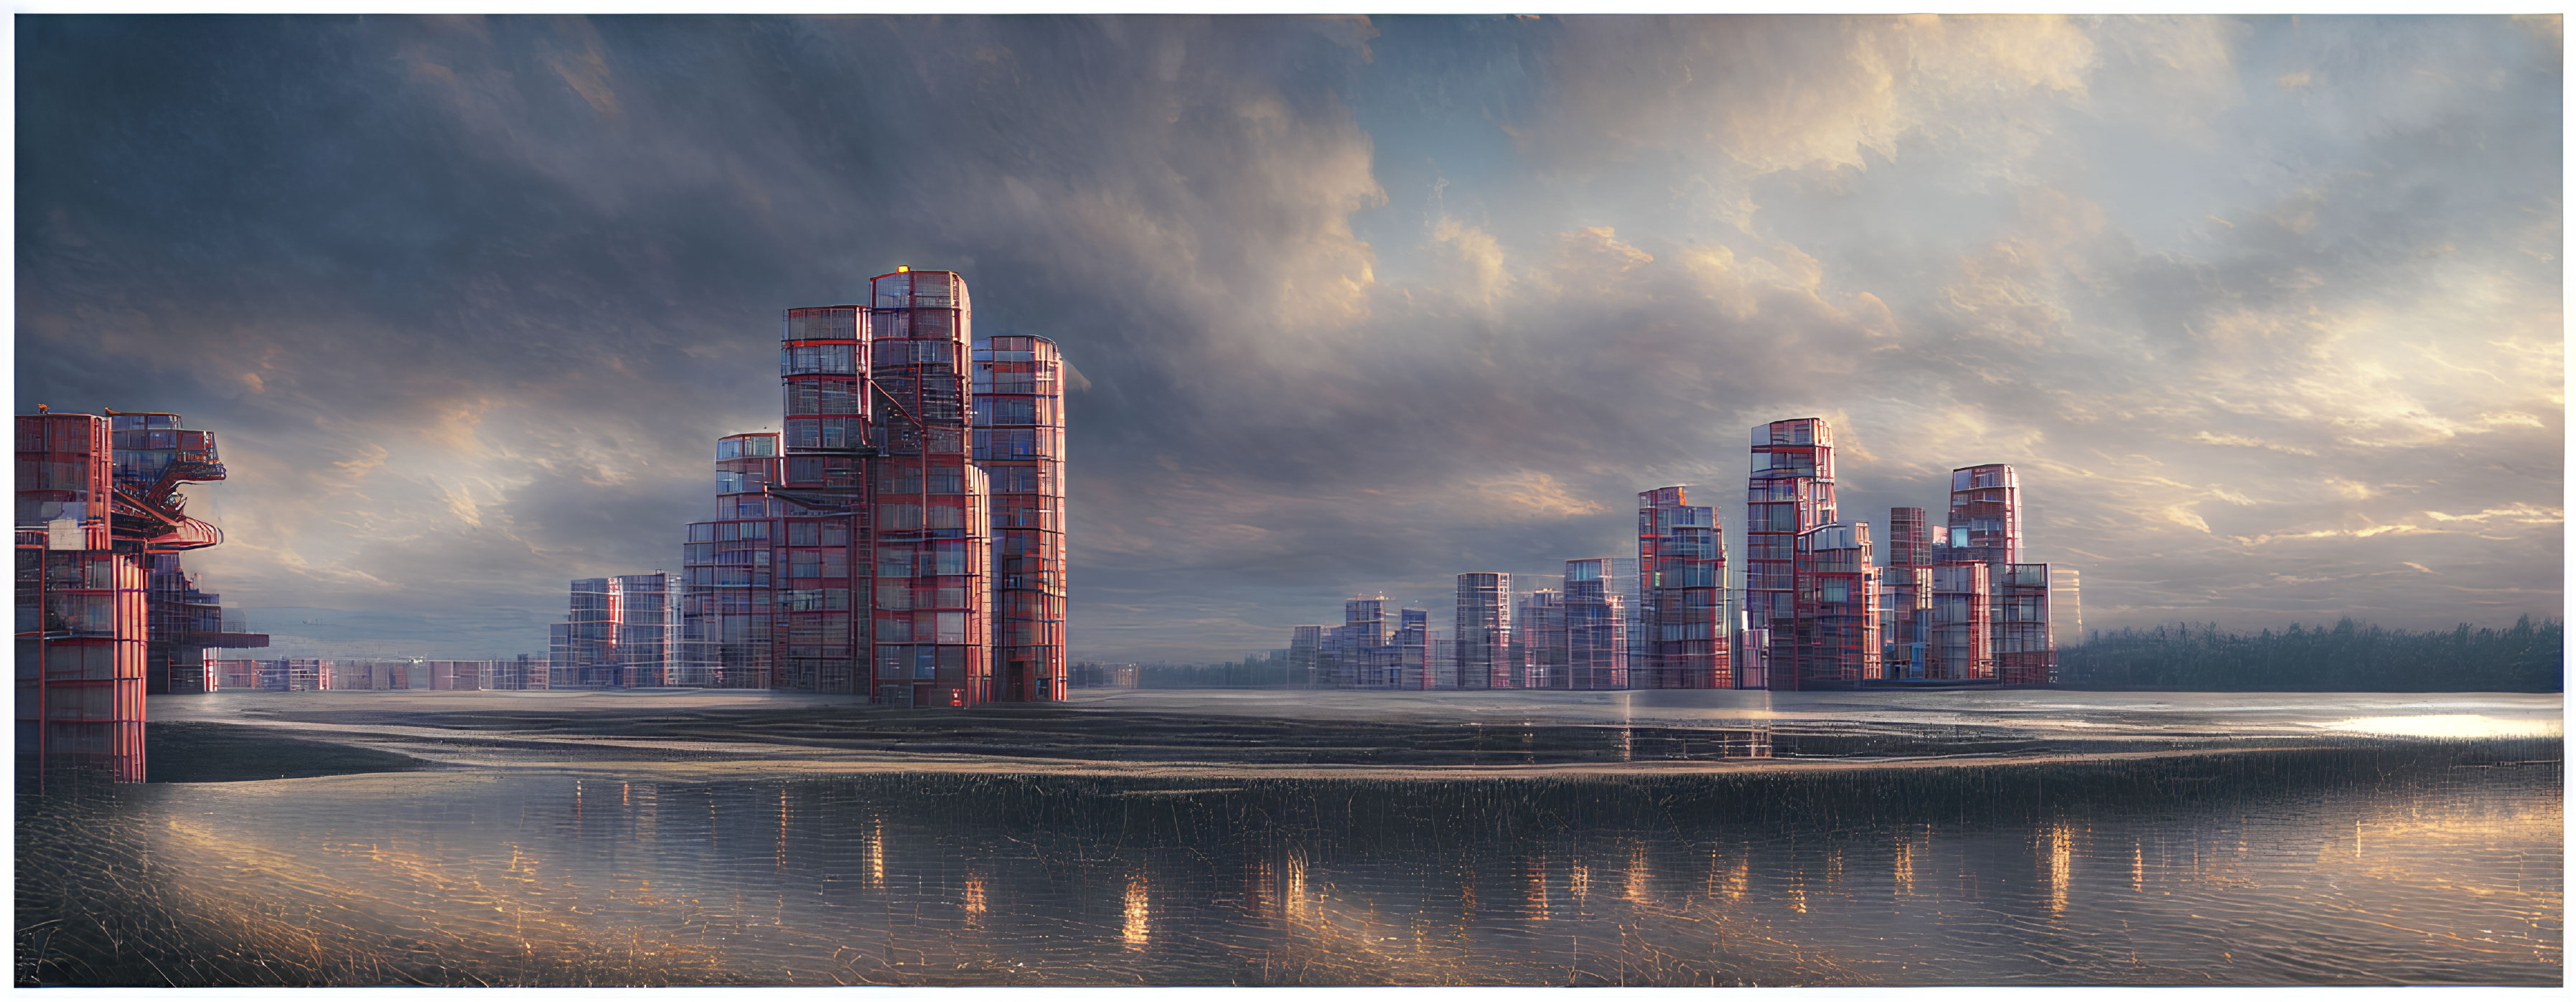 Futuristic cityscape with cylindrical structures under dramatic sunset sky